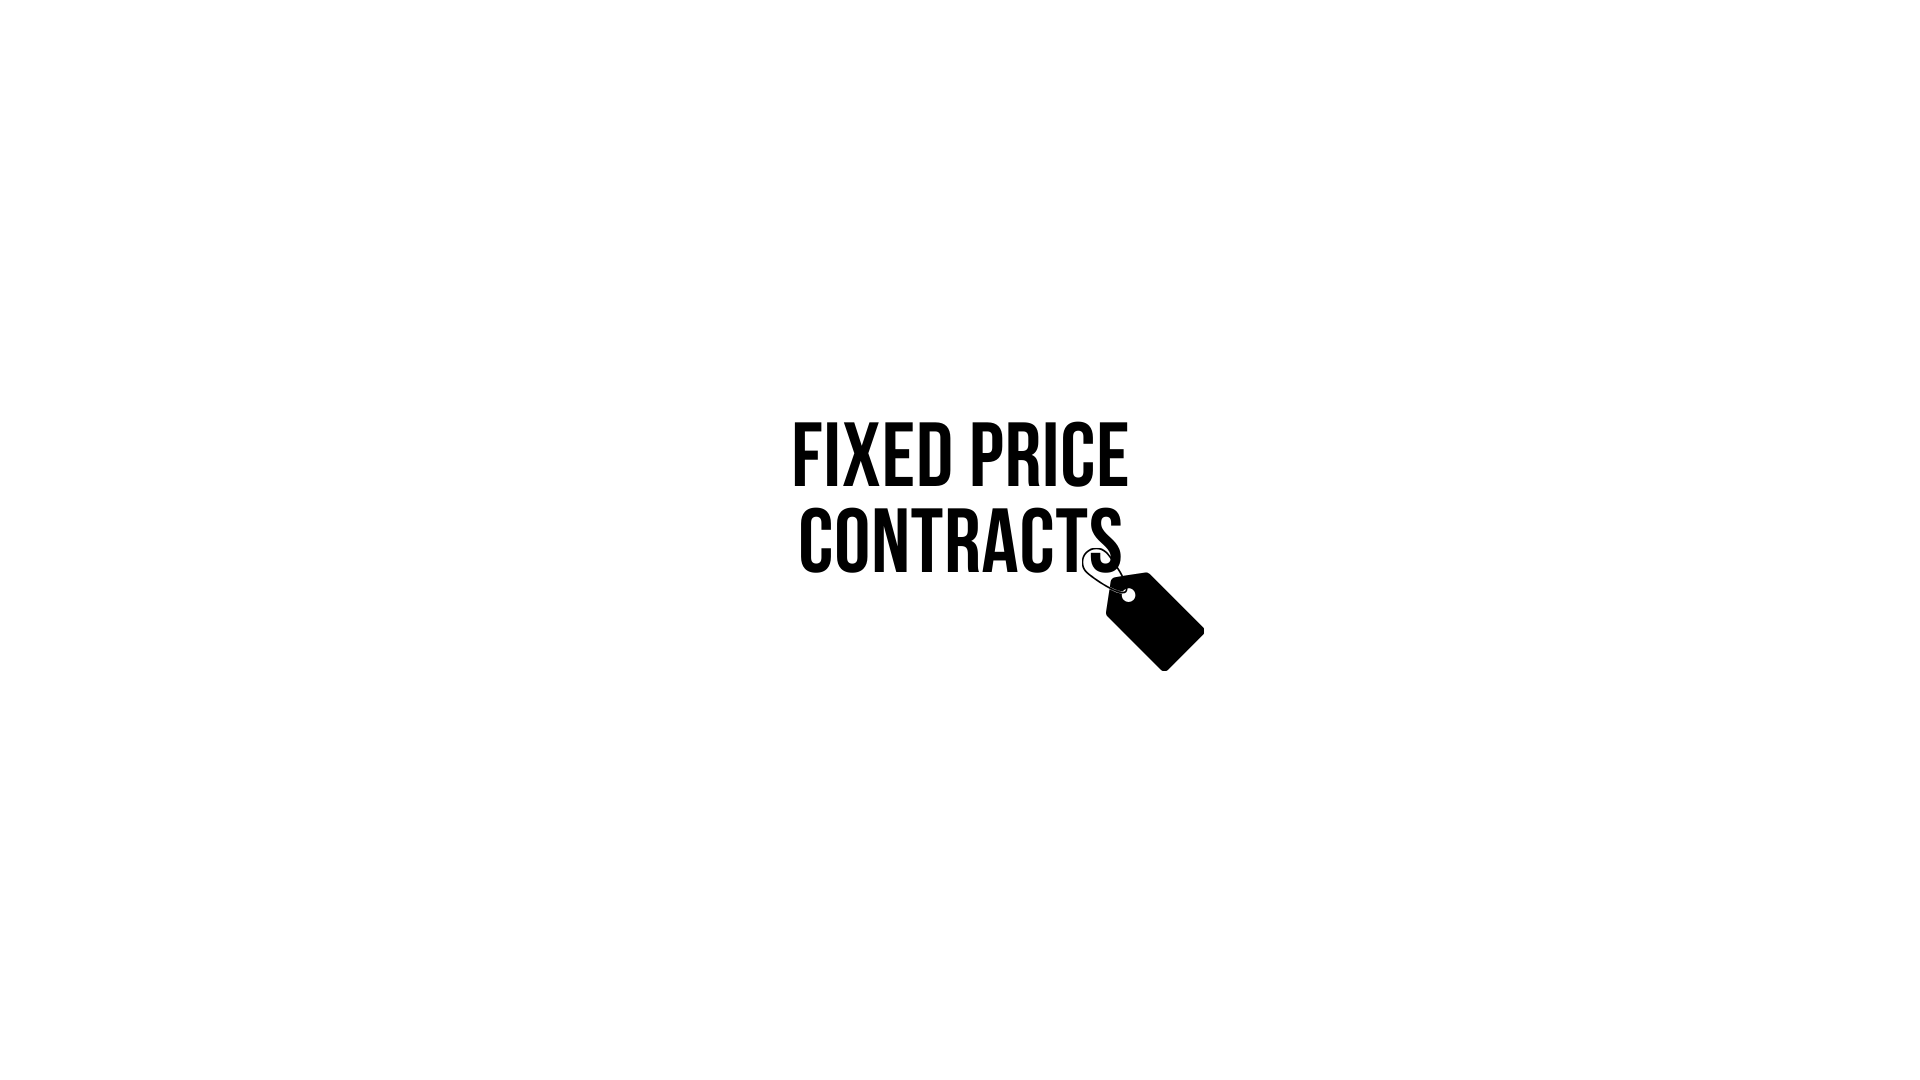 Fixed price government contracts